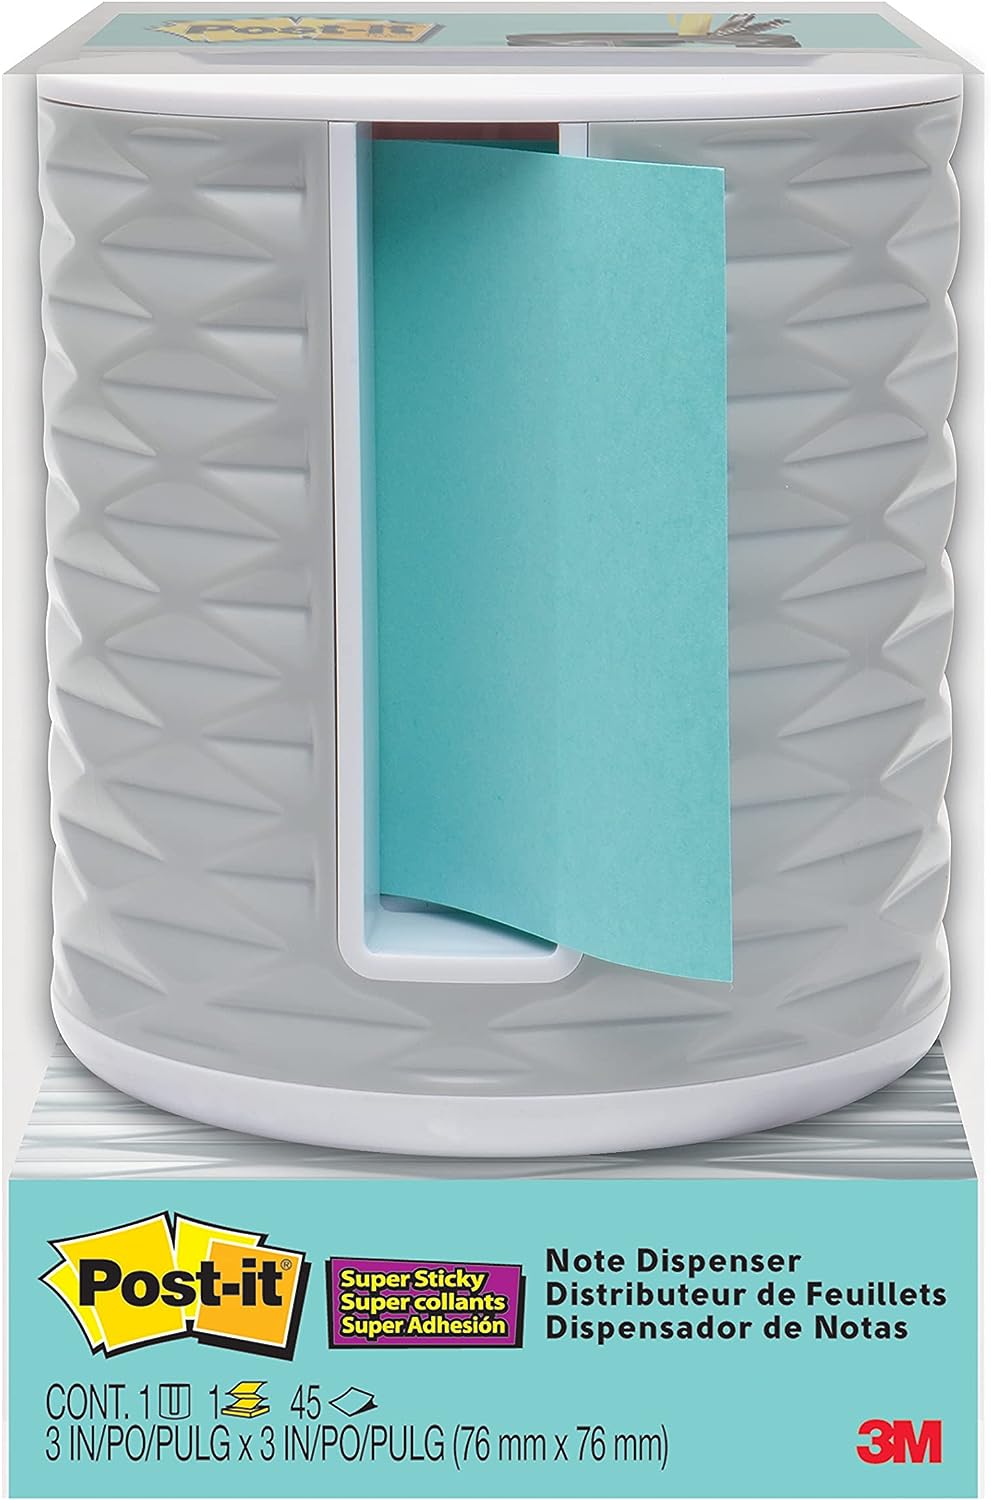 Post-it Note Dispenser, 3x3 in, Vertical, White with Grey, Pack Includes Dispenser and a 45-Sheet Pad of Pop-up Notes (ABS-330-W)